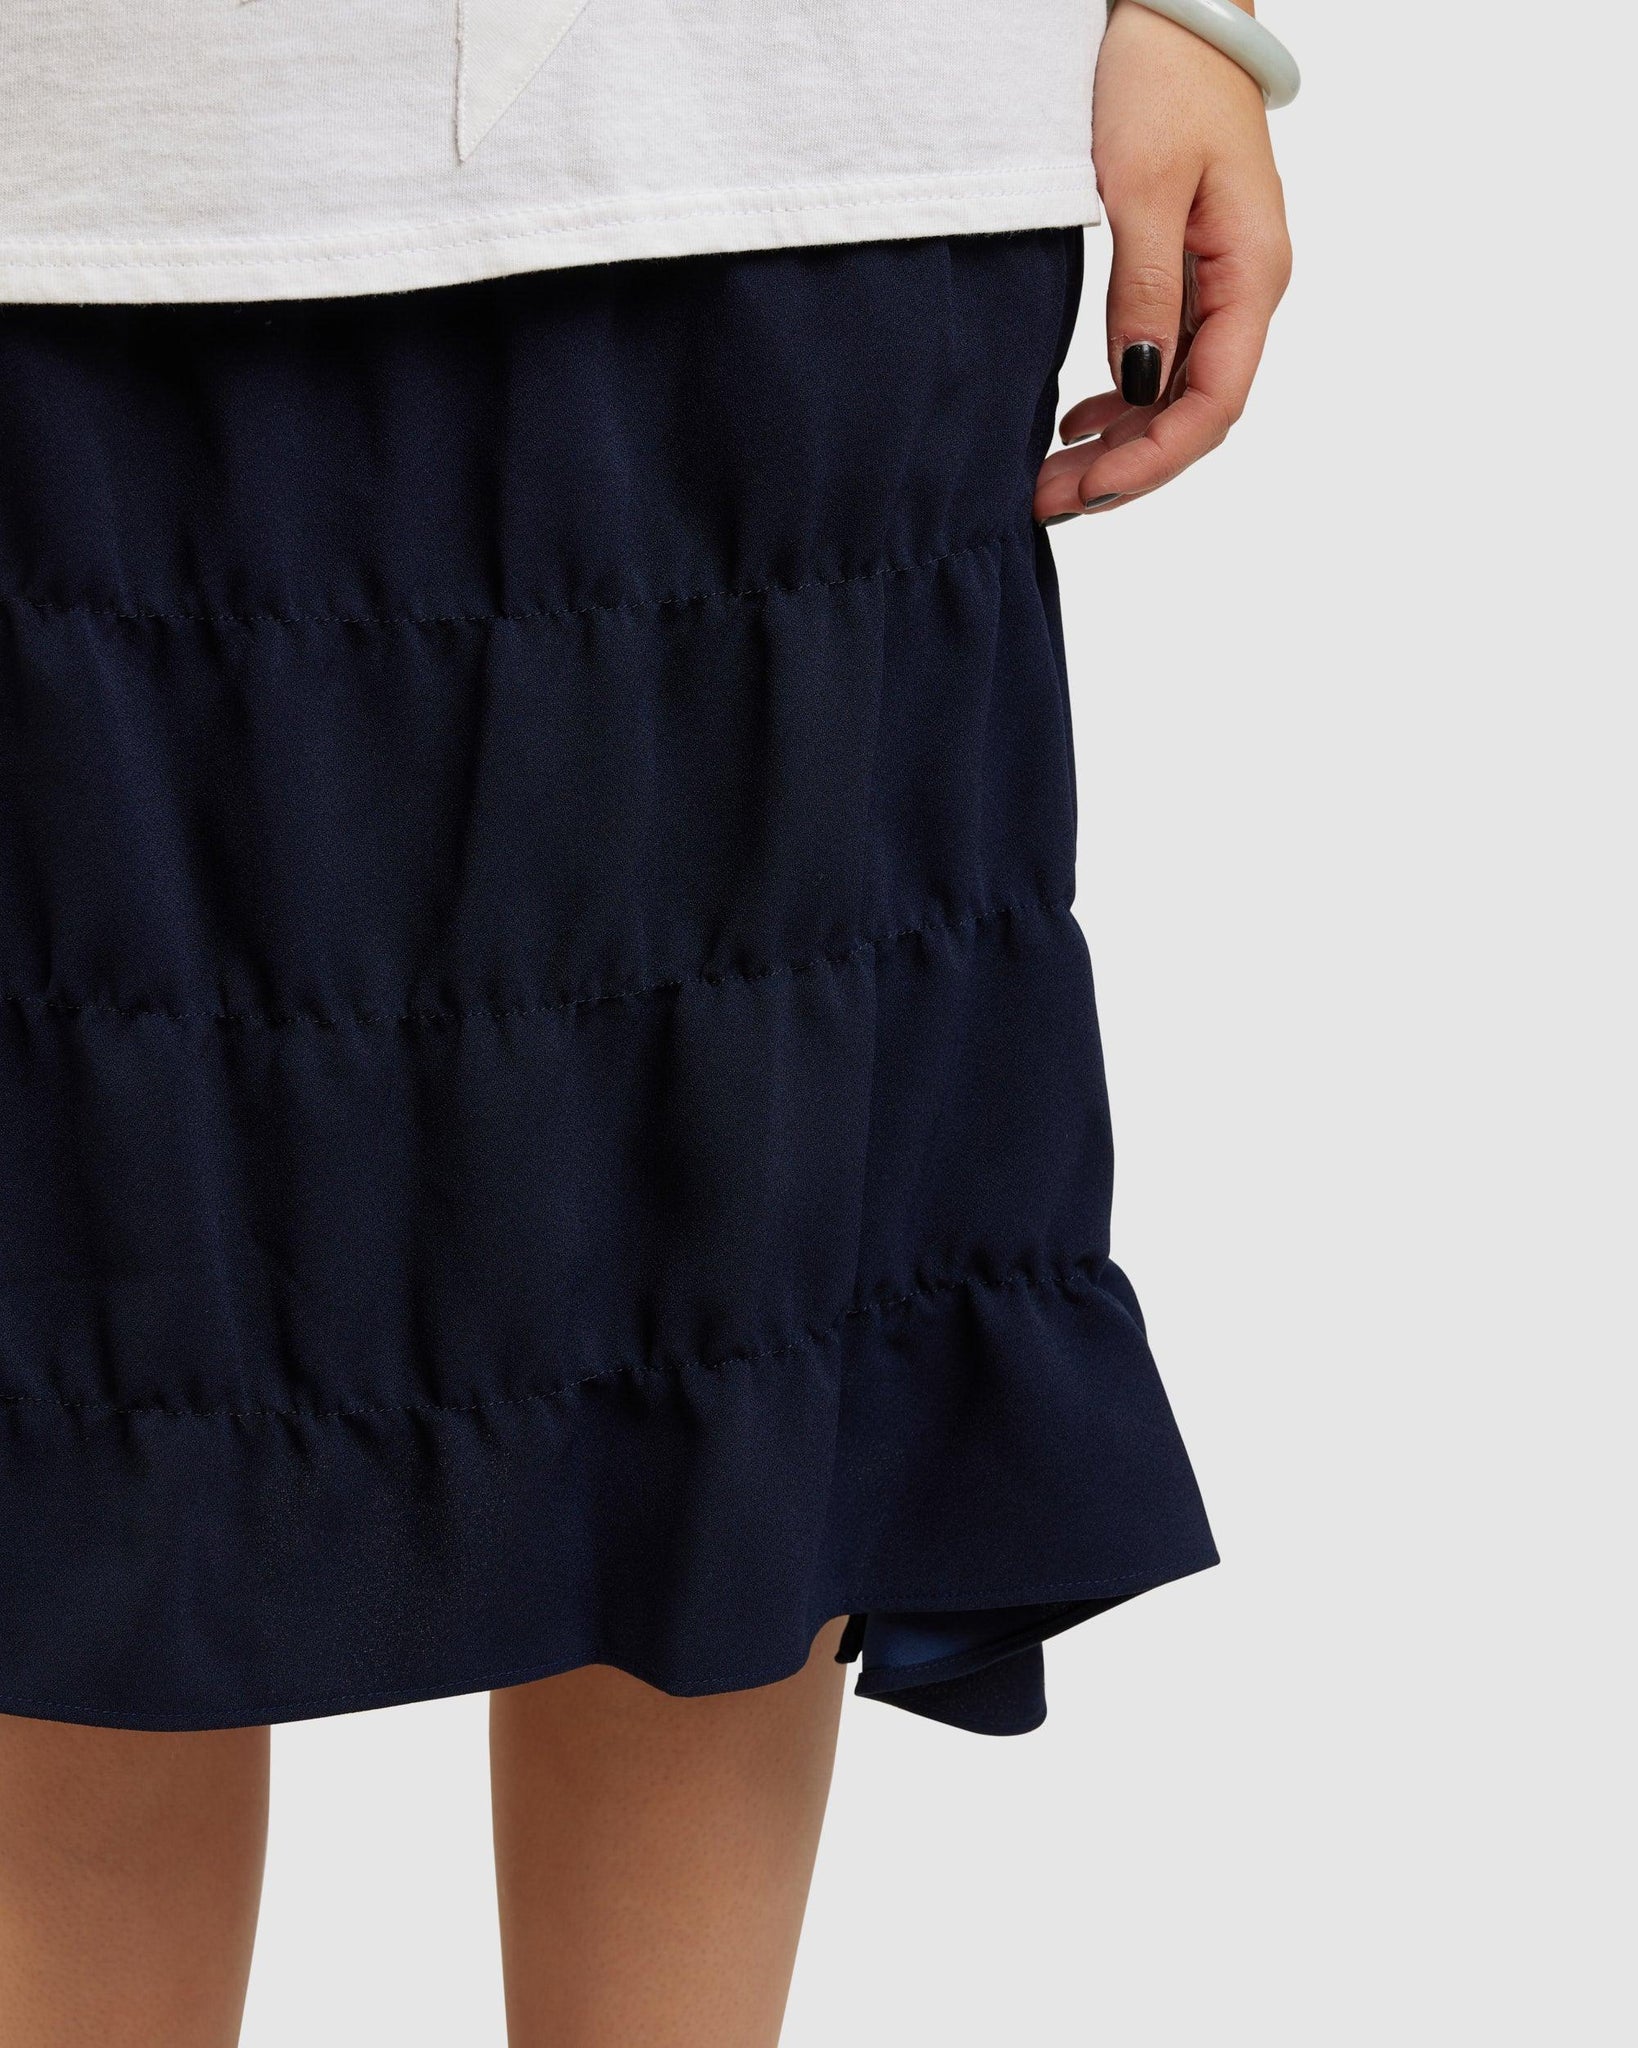 Shirred Pencil Skirt Navy Crepe - {{ collection.title }} - Chinatown Country Club 